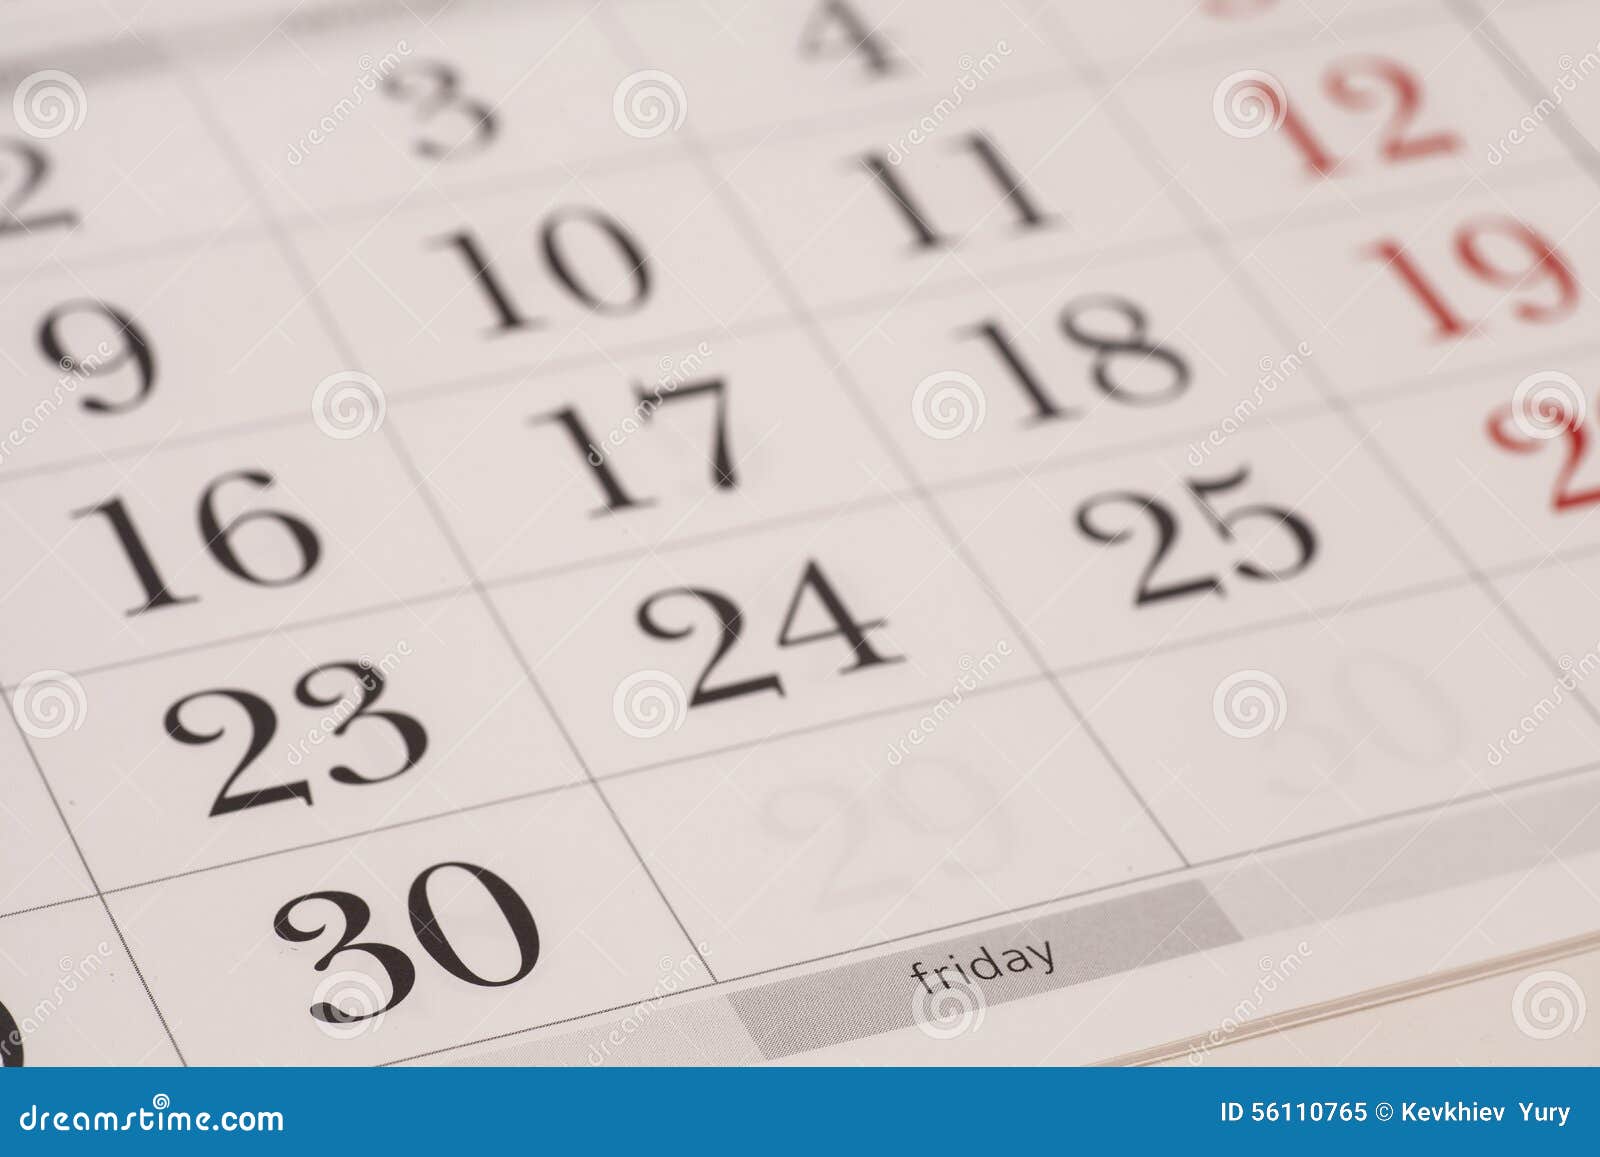 CalendarFriday stock image. Image of friday, schedule 56110765